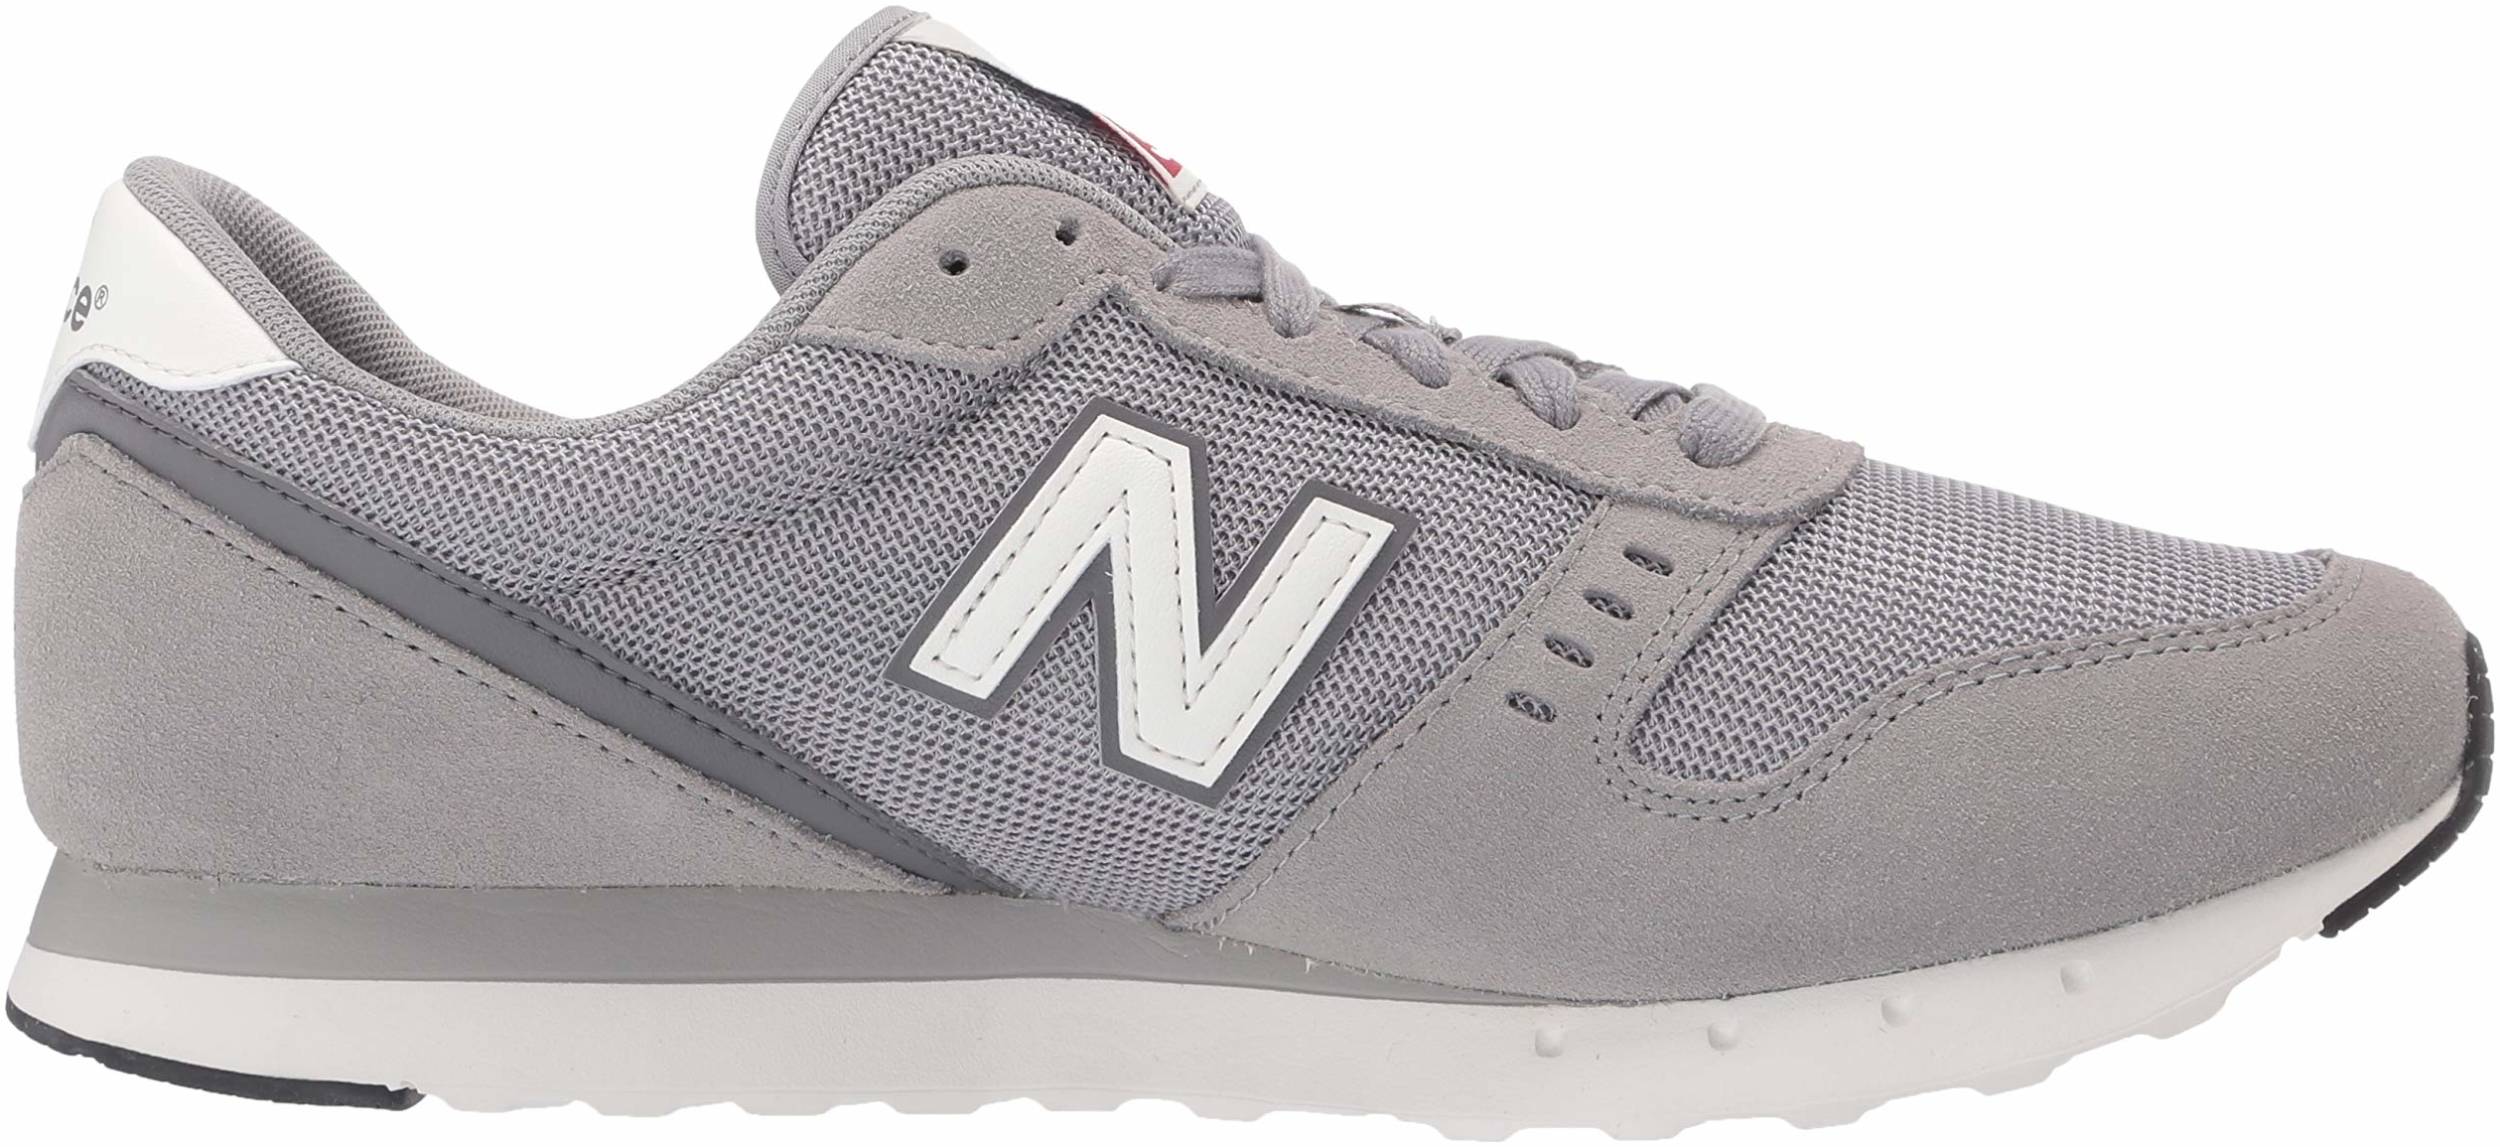 New Balance 311 sneakers (only £34) | RunRepeat